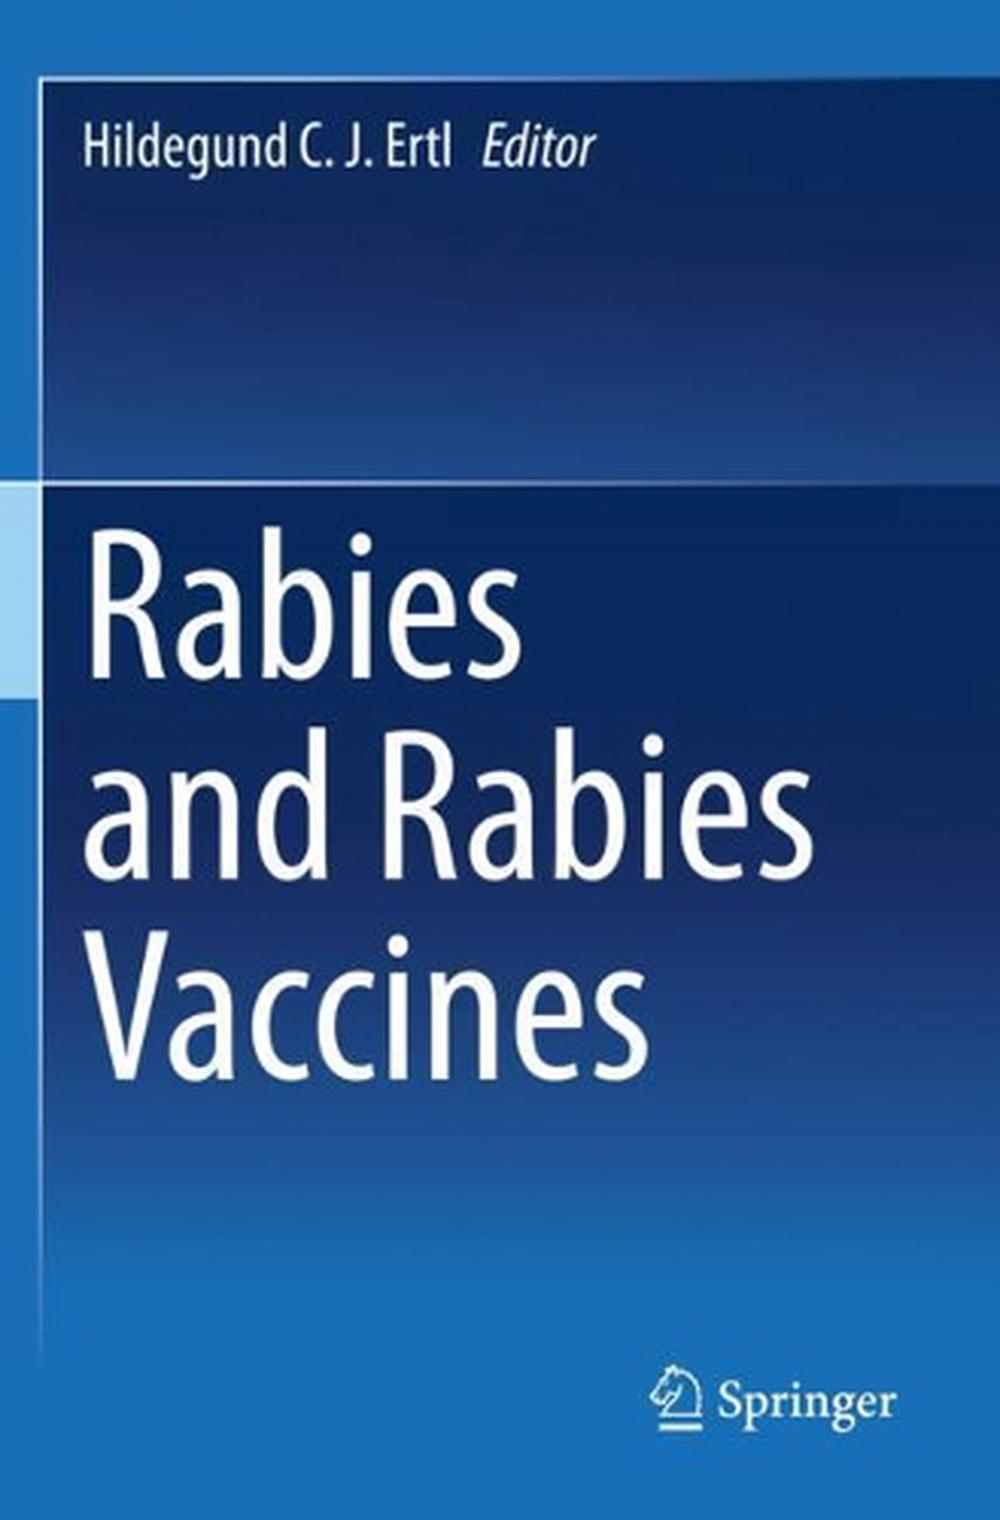 Rabies and Rabies Vaccines (English) Hardcover Book Free